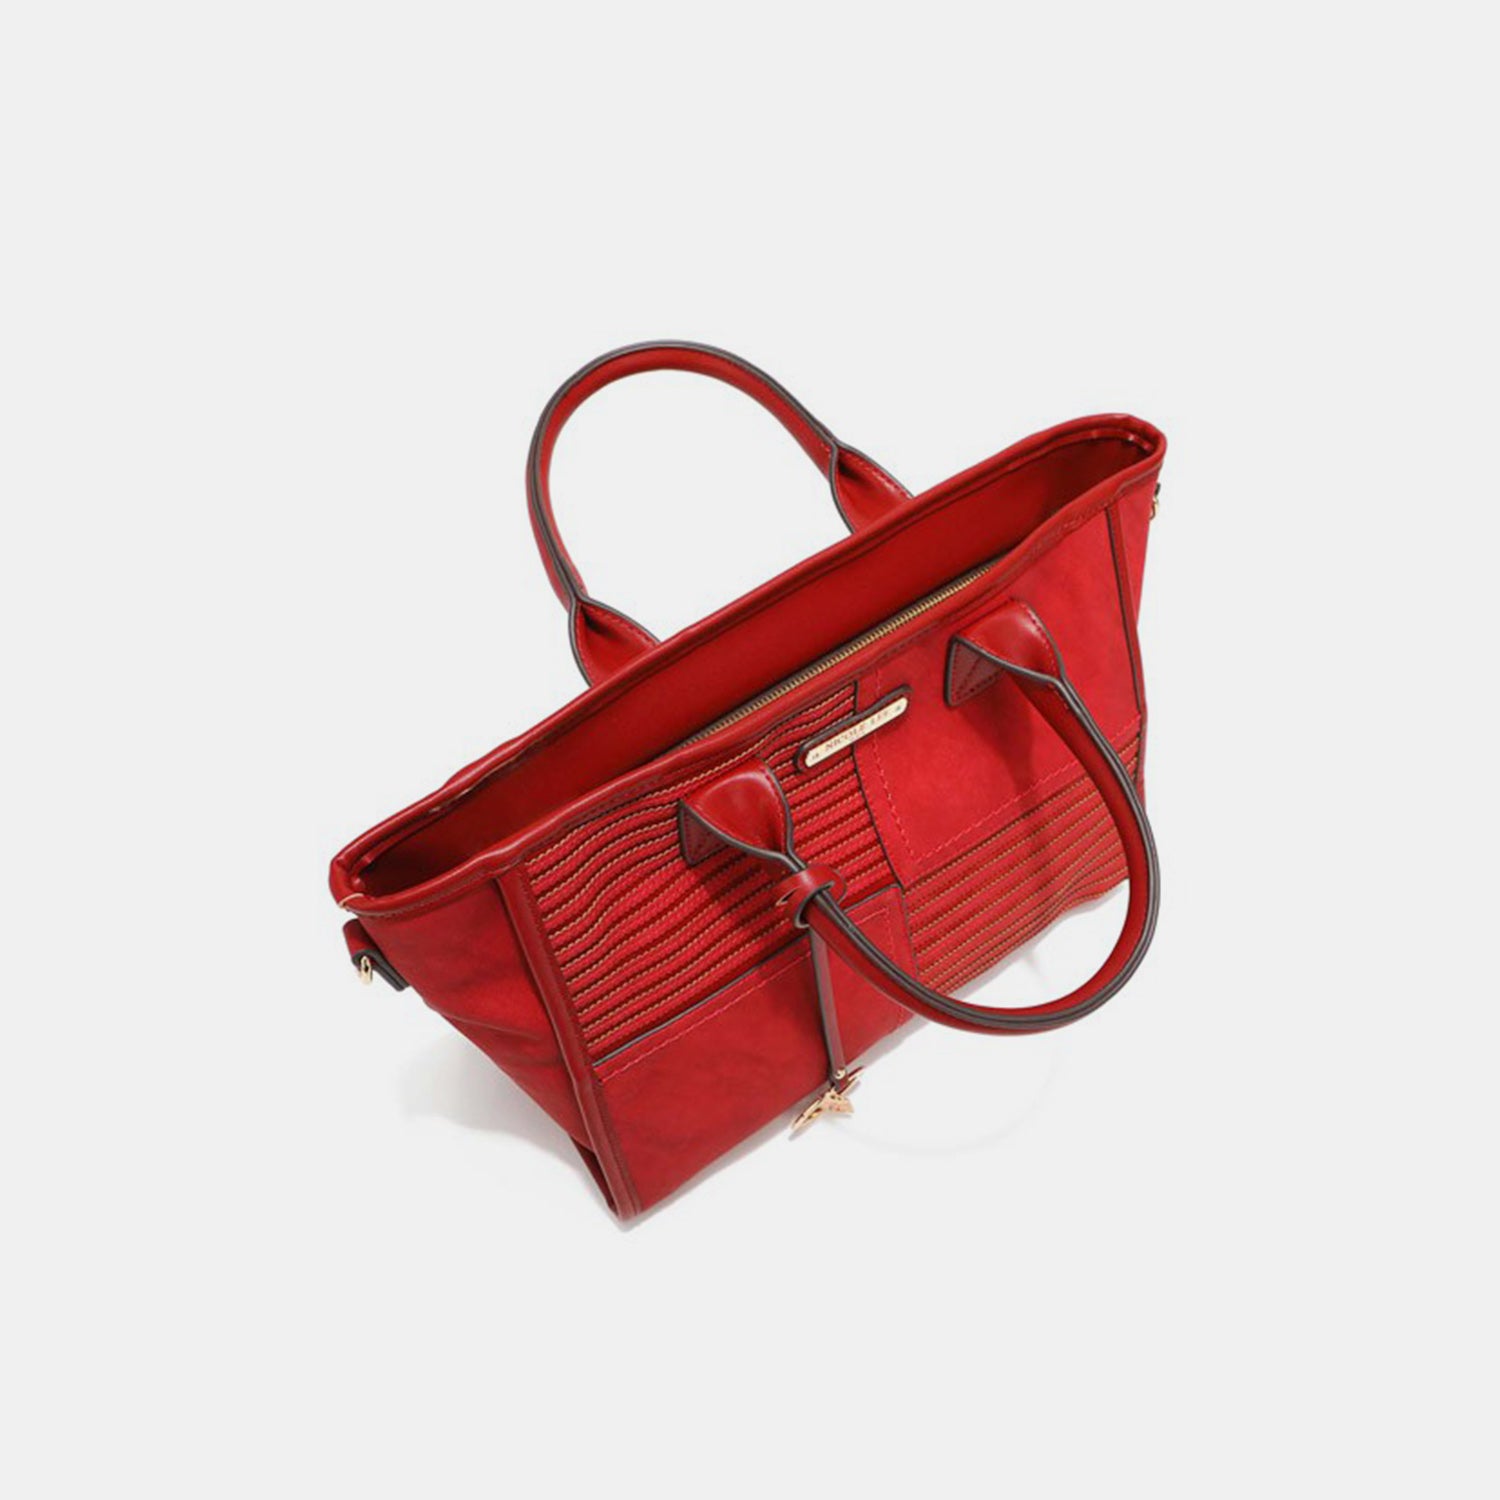 The Nicole Lee USA Scallop Stitched Handbag from Marianela's Exclusive Shop, LLC is a vibrant red vegan leather accessory adorned with gleaming gold hardware. It features double handles, a zippered top, and intricately textured horizontal lines for added design flair. The handbag includes a front pocket highlighted by a small gold logo plate and offers a spacious, well-structured interior that exudes elegance.